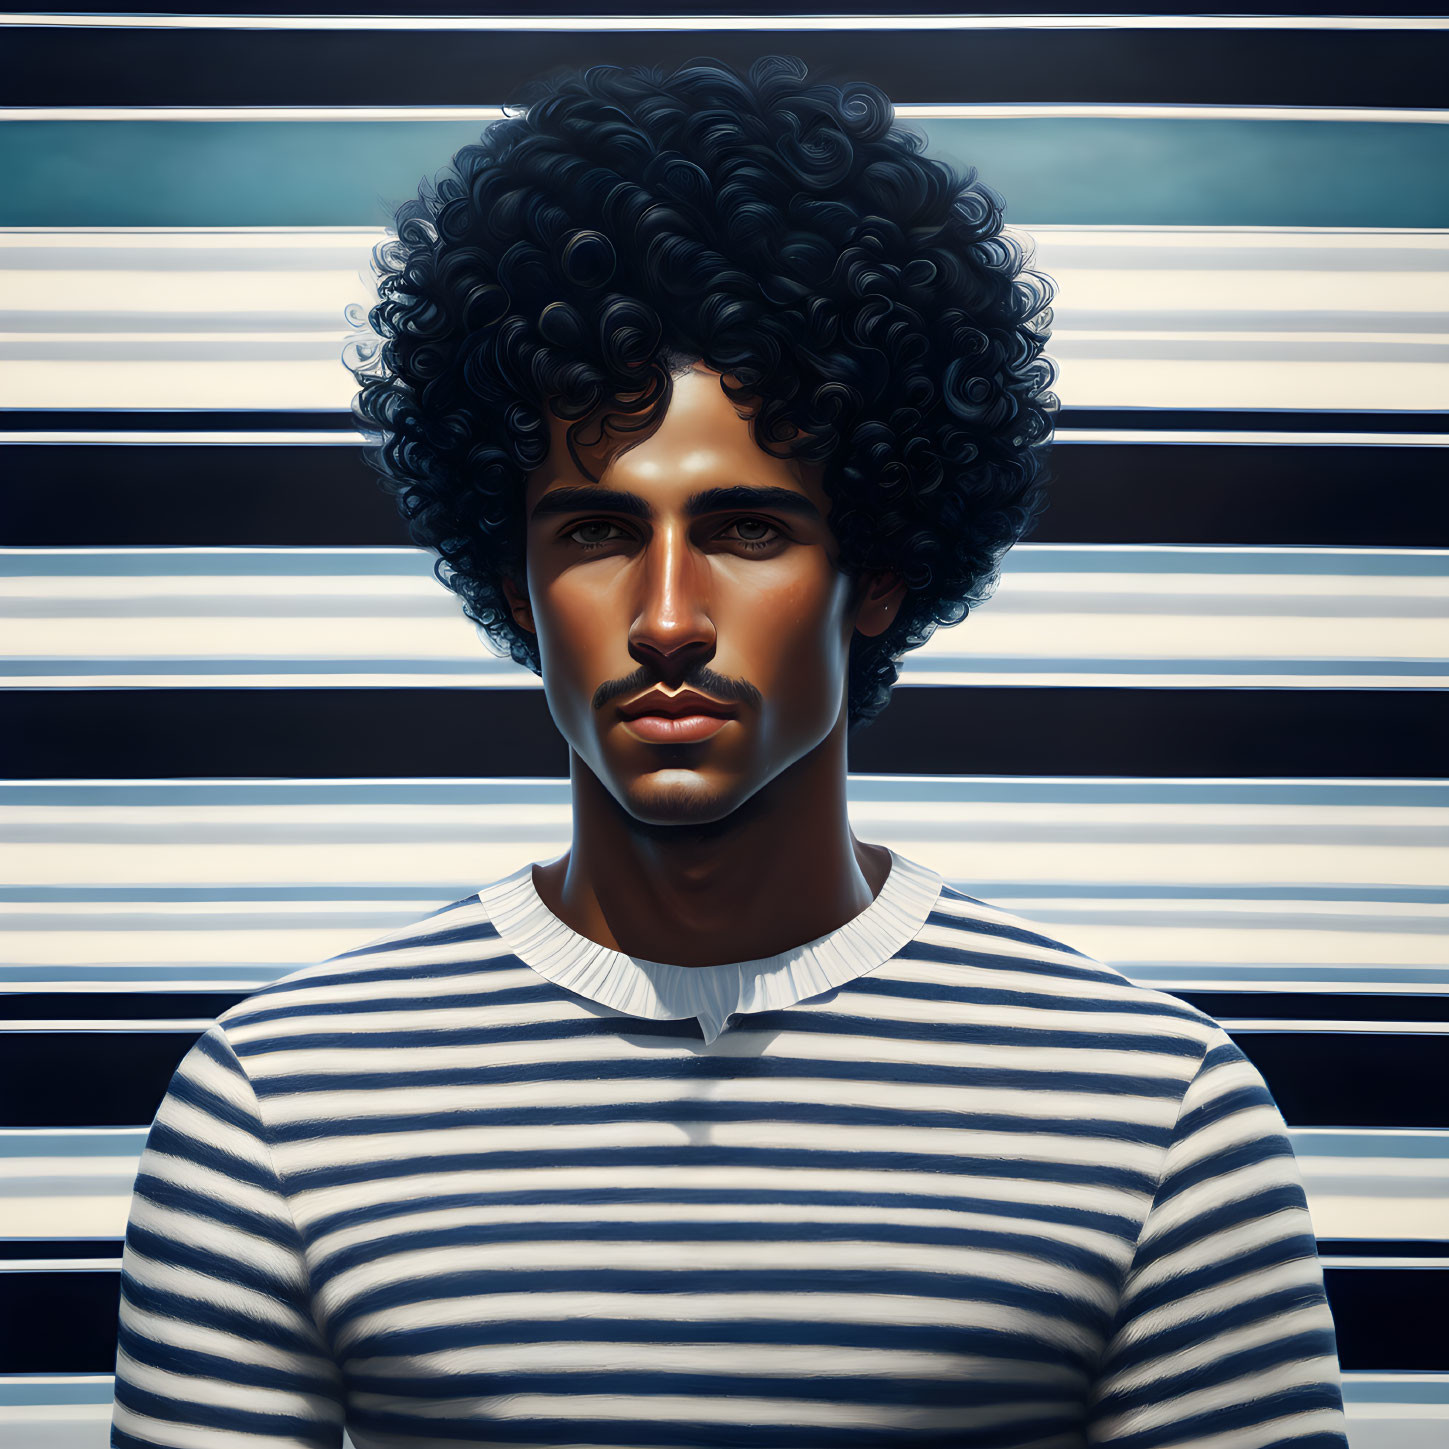 Man with Curly Hair in Striped Shirt Against Horizontal Lines